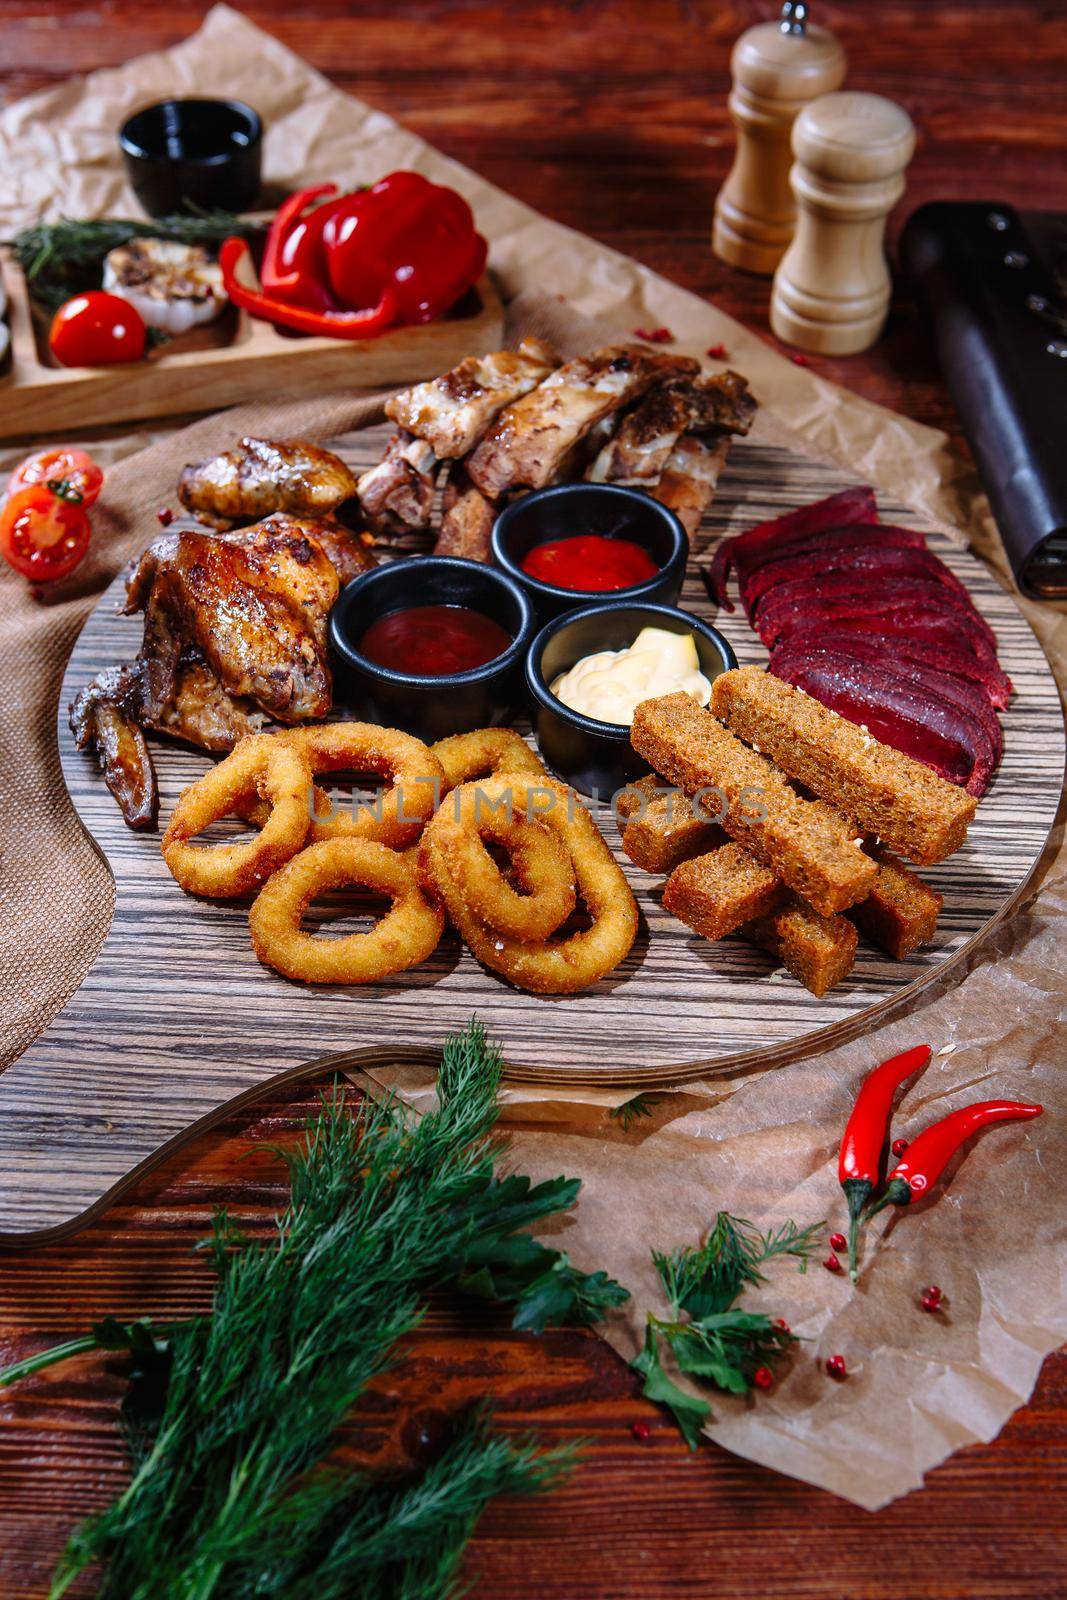 Food set for beer lovers, beer set, fried ribs, mix. Top view